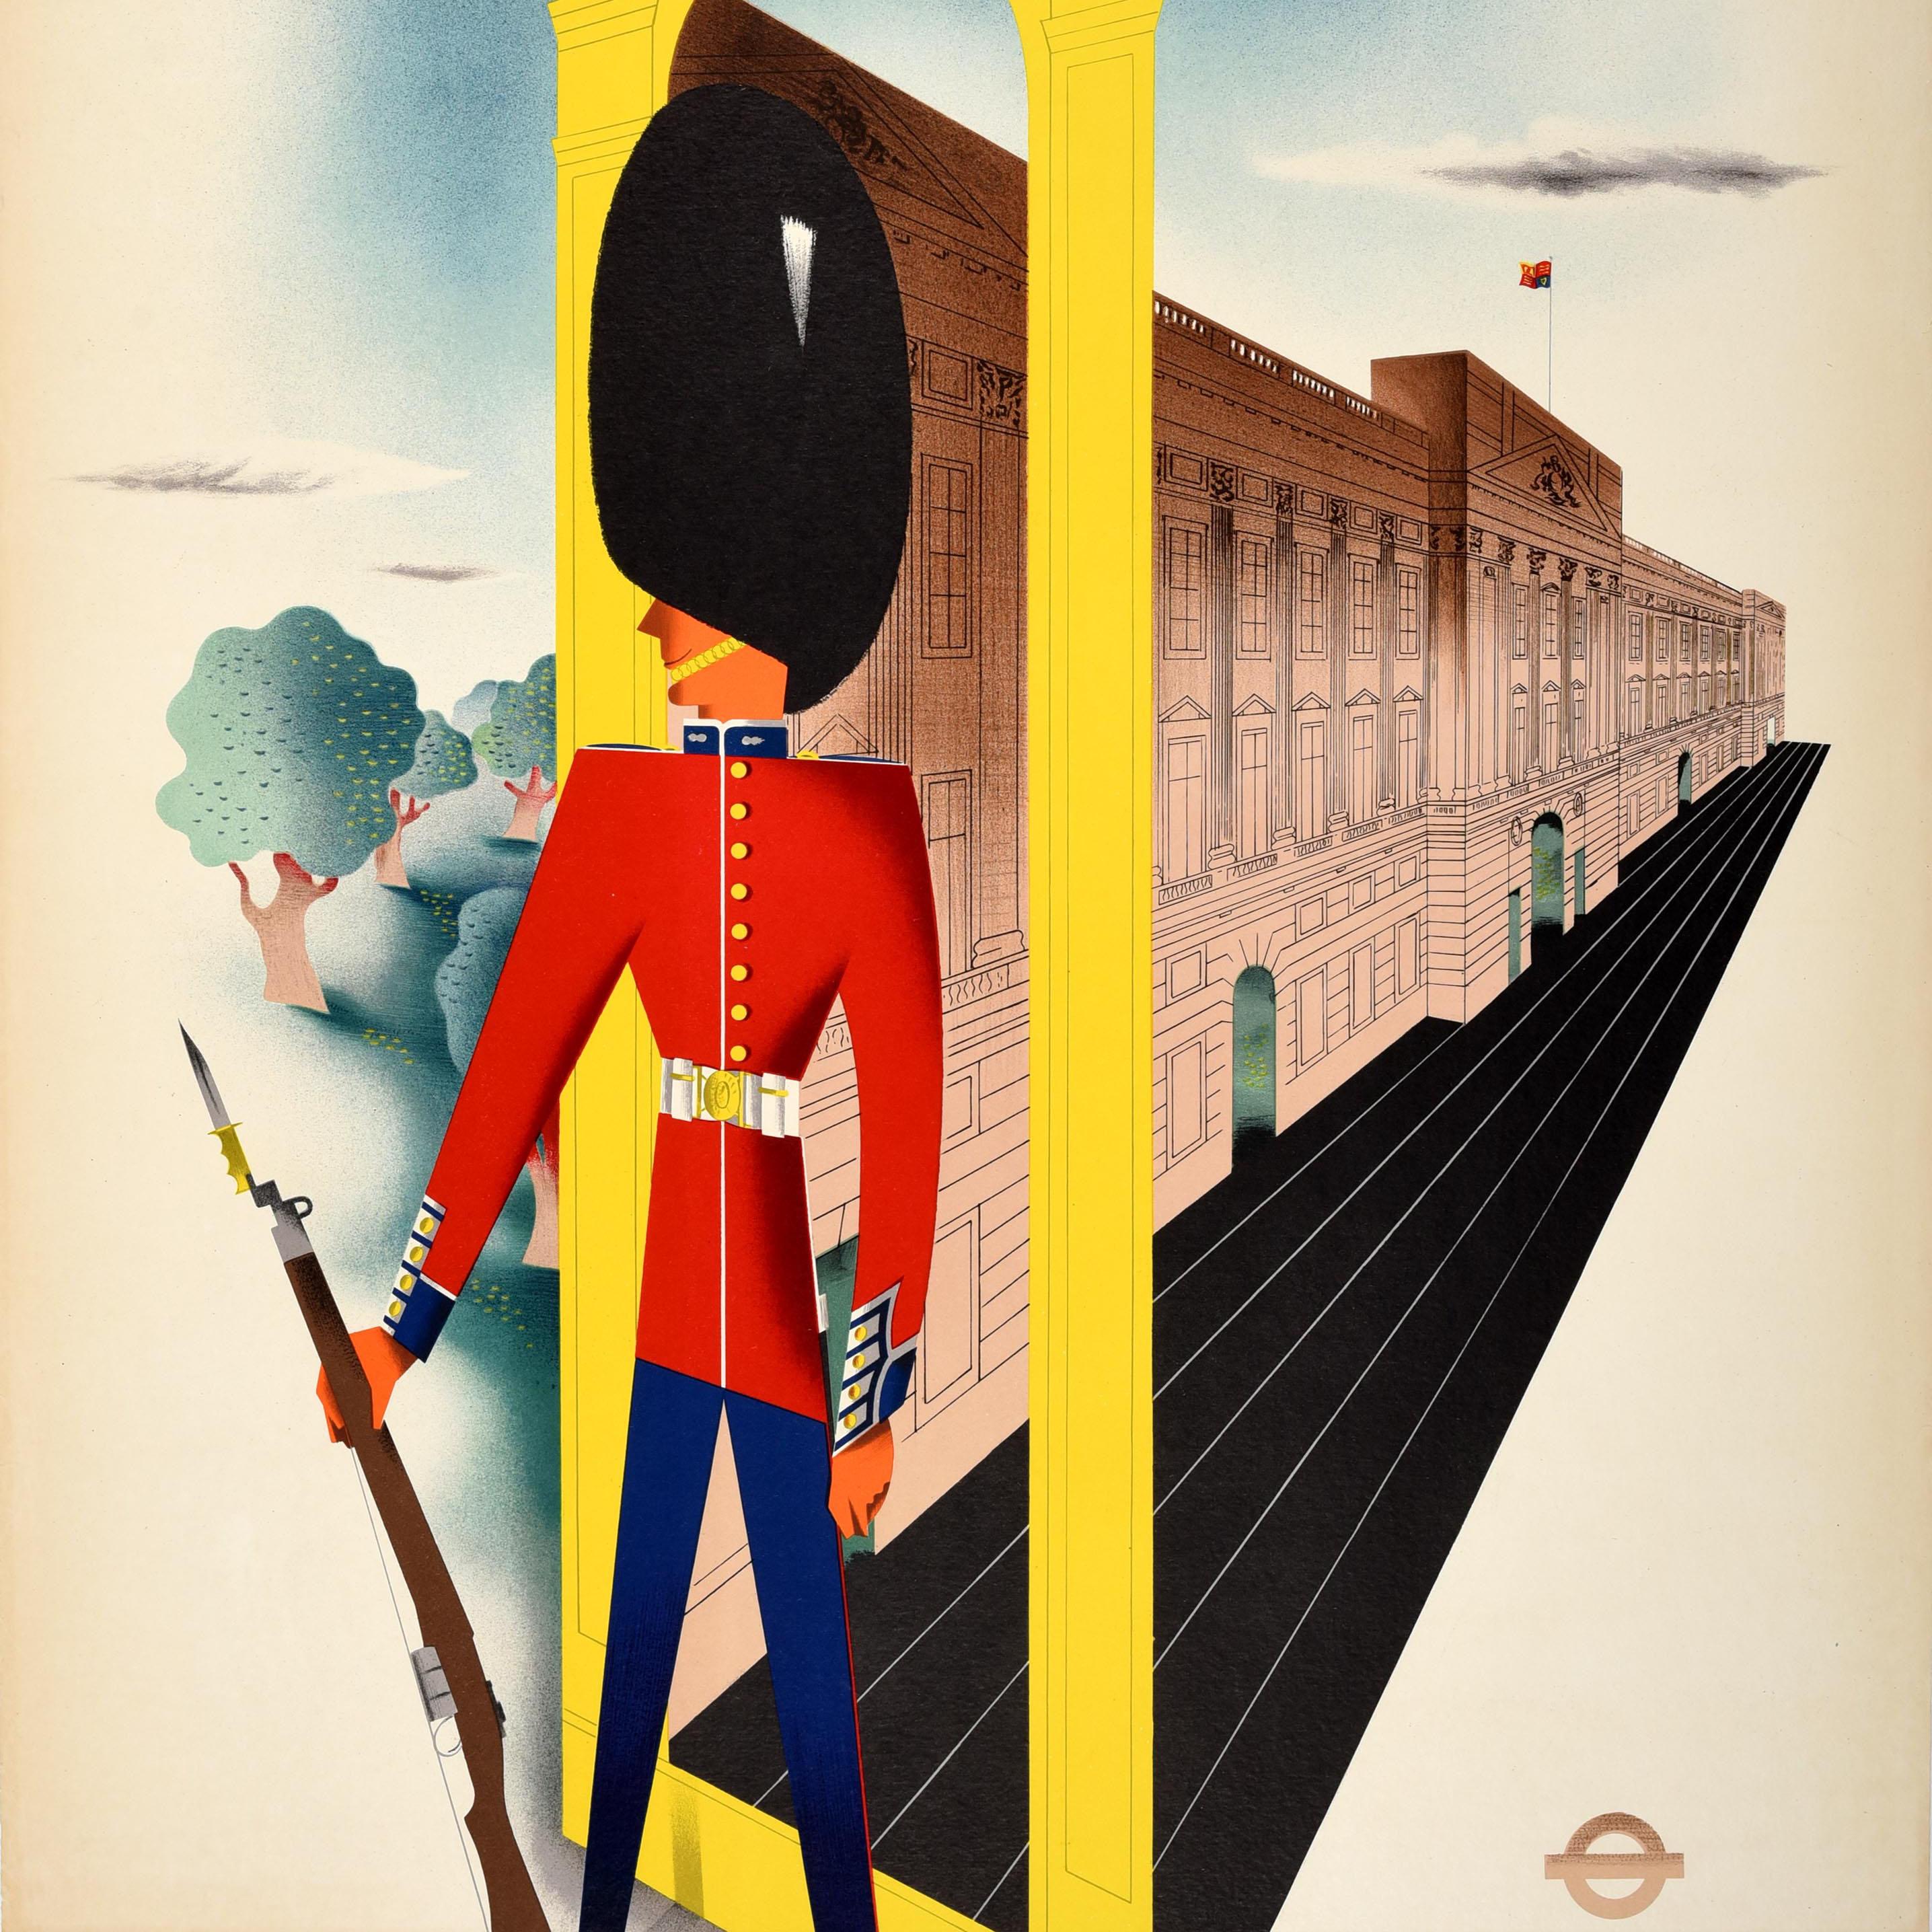 Original vintage London Transport poster featuring a colourful mid-century illustration by the painter and poster designer John Bainbridge (1919-1978) depicting a Royal Guard / Queen's Guard in smart military uniform and a bearskin hat holding a